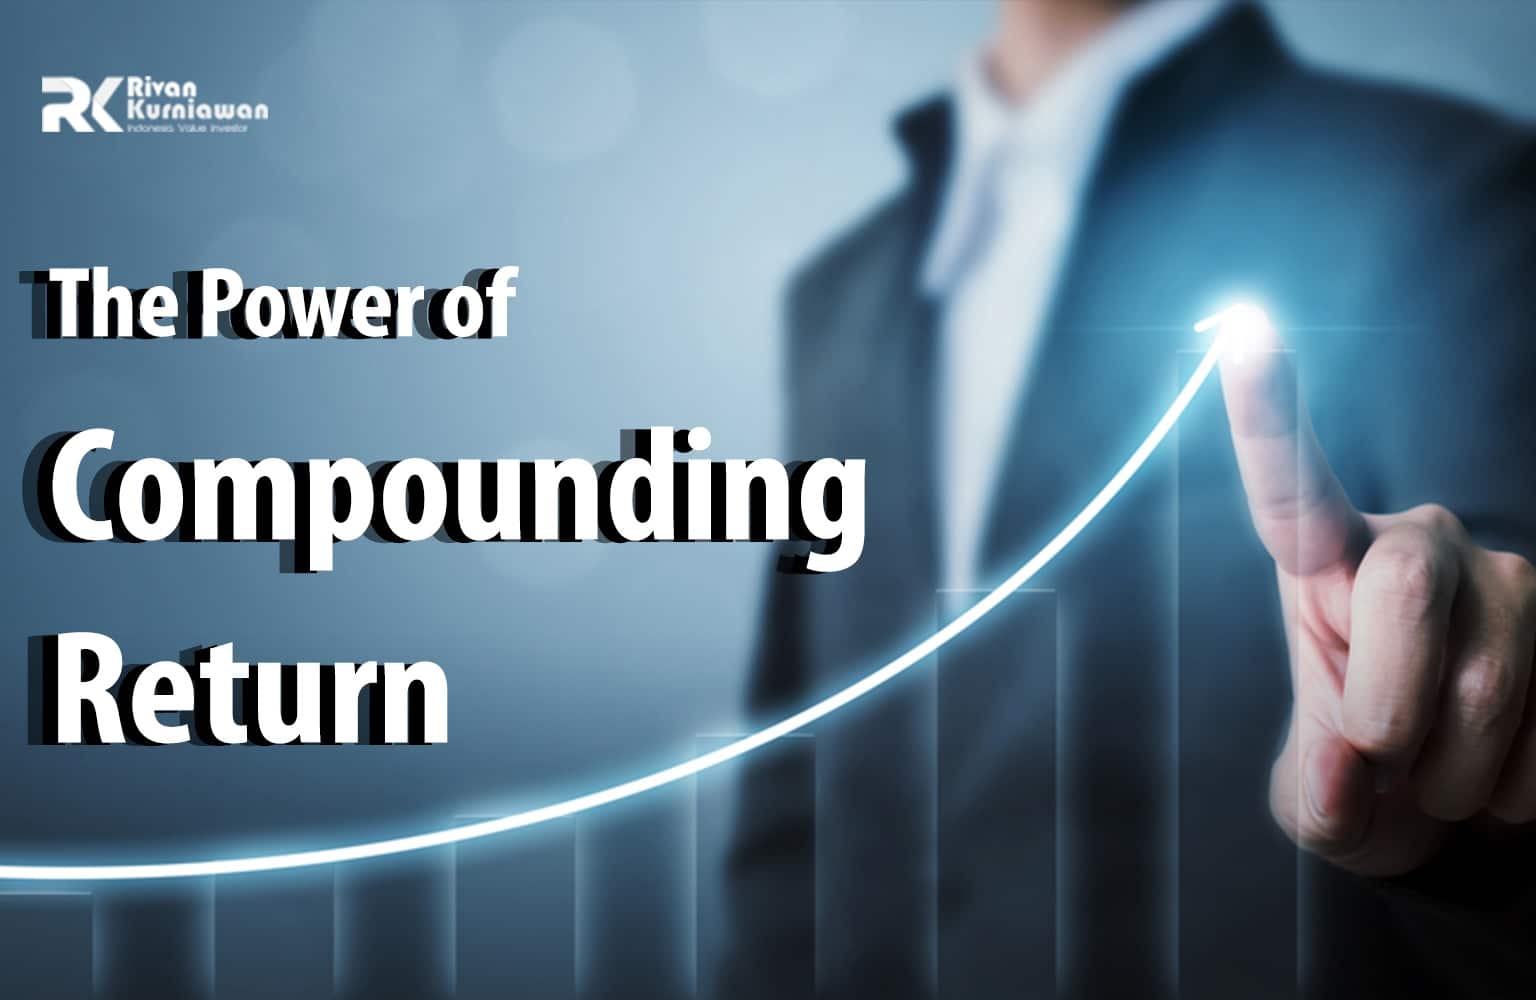 The Power of Compounding Return